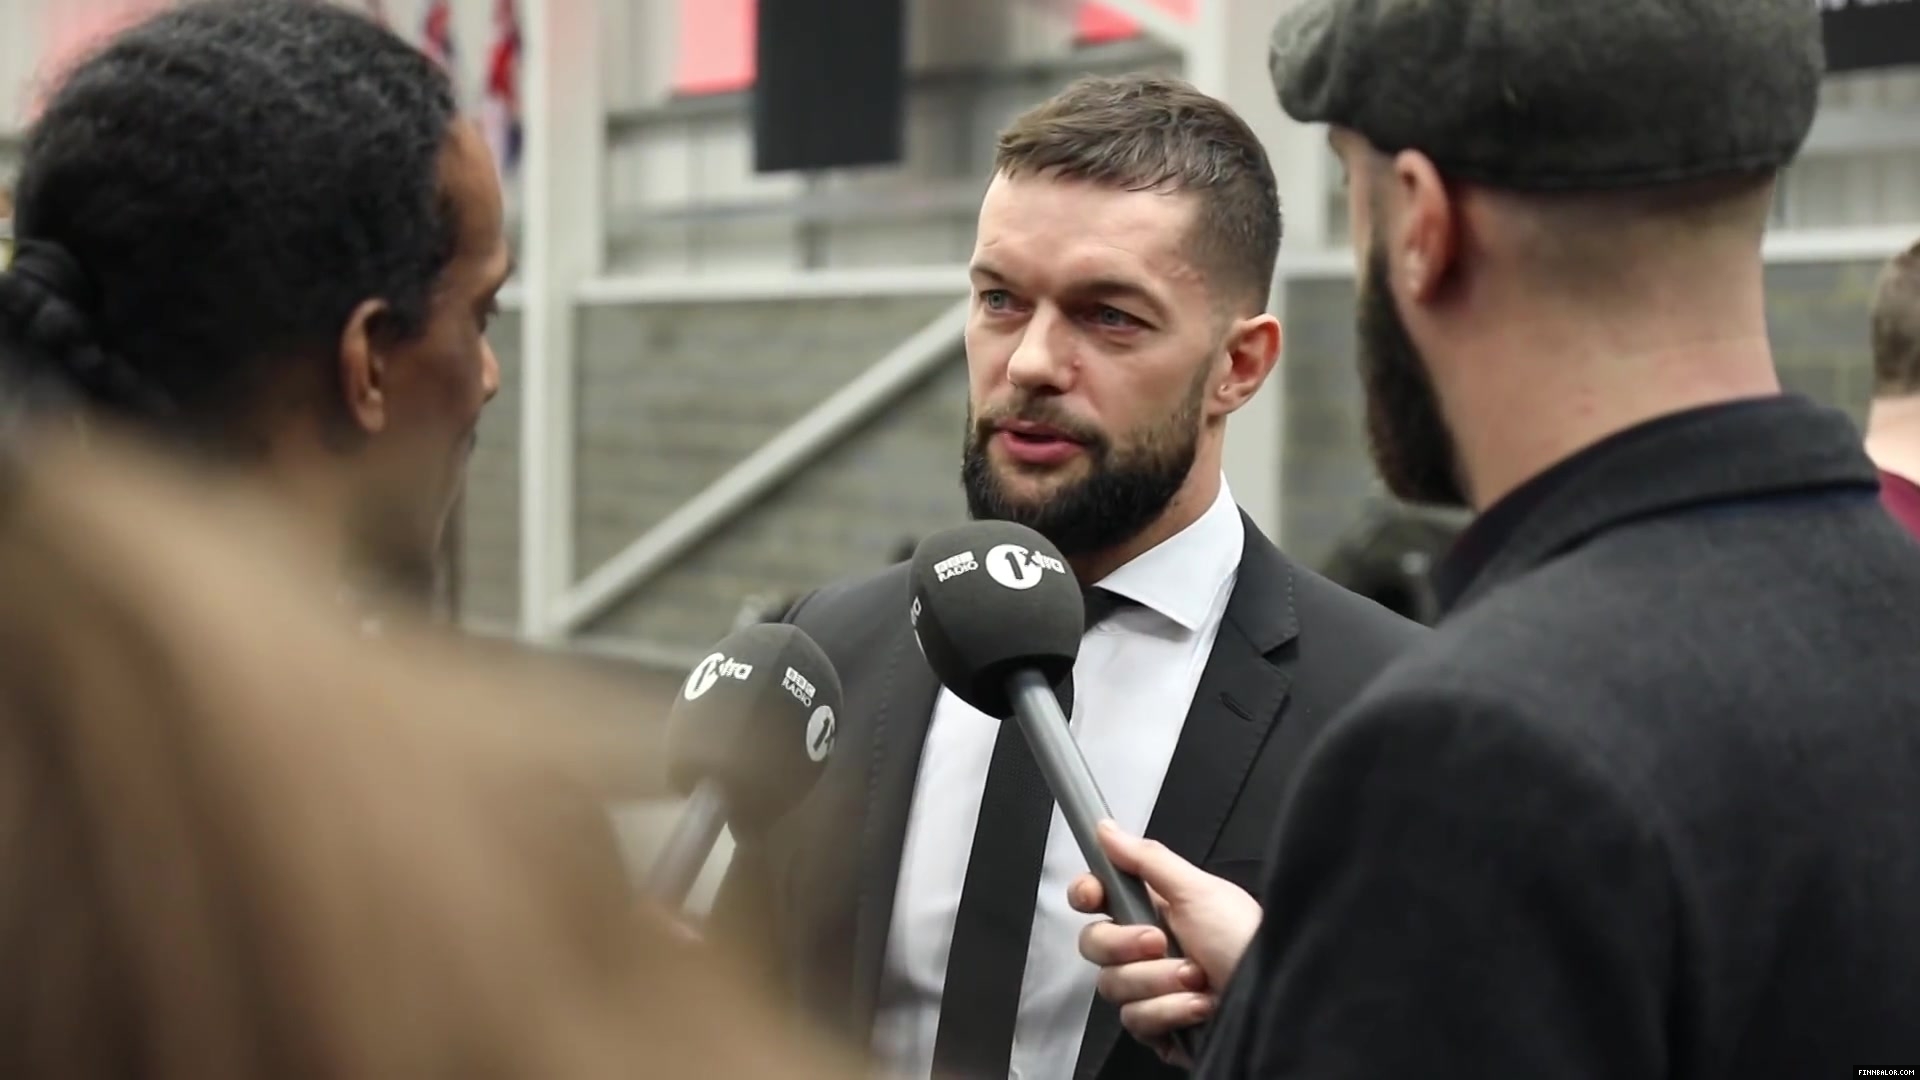 WWE_Superstar_FINN_BALOR_joins_MOUSTACHE_MOUNTAIN_at_the_opening_of_the_NXT_UK_PC_025.jpg